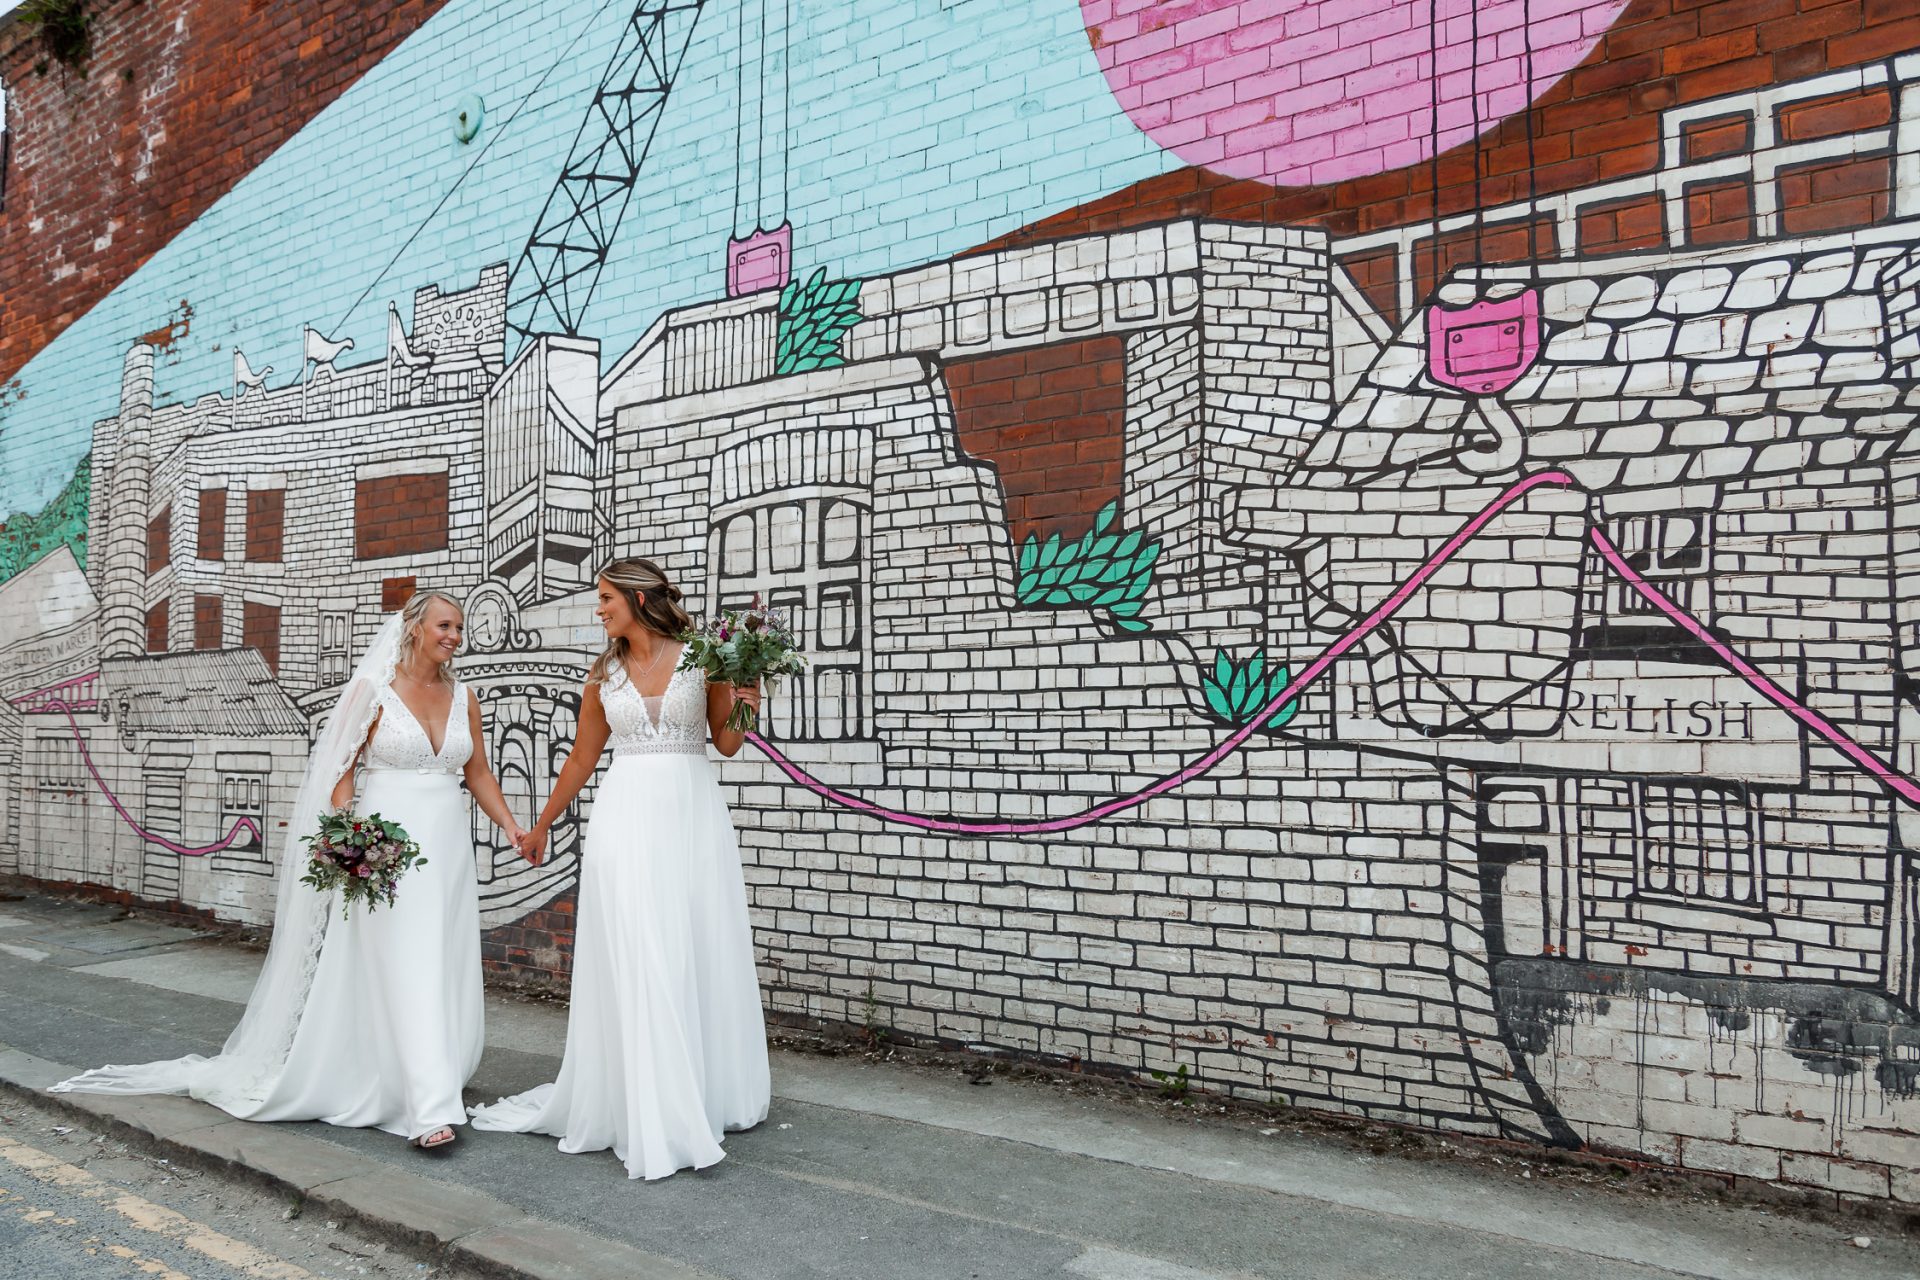 Bride & Bride walk together hand in hand in front of the Jo Peel mural at Kelham Island. Isabelle B Photography, Sheffield Wedding Photography